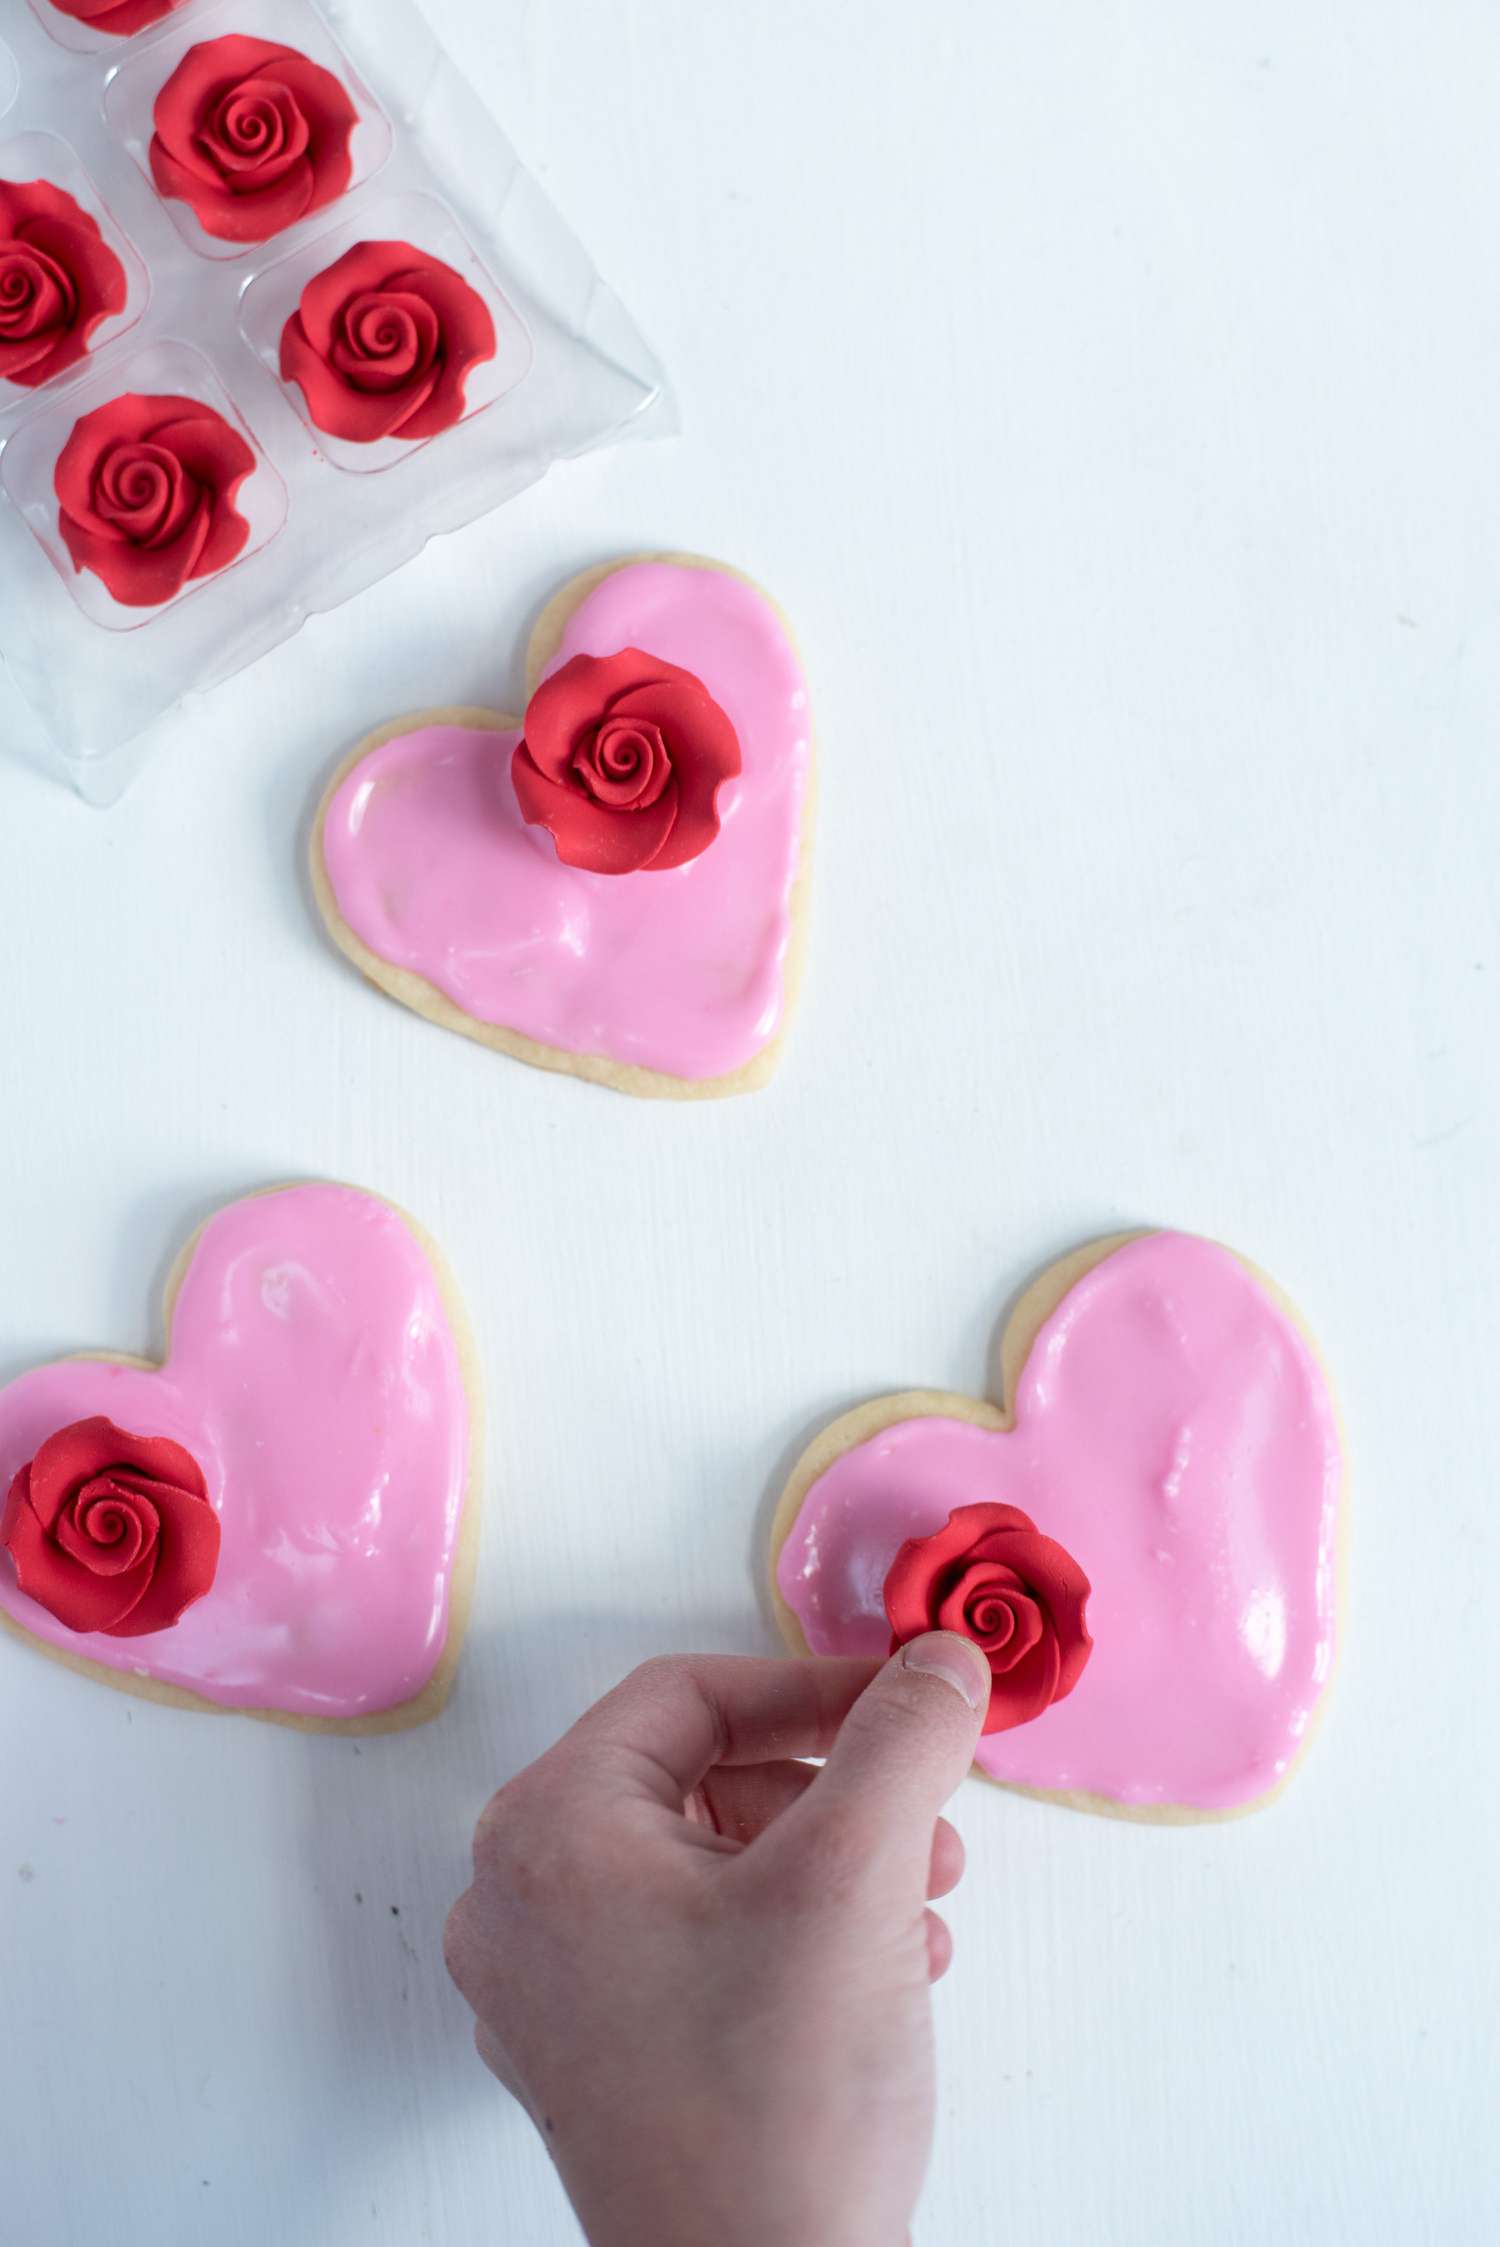 placing red sugar roses on heart-shaped iced cookies decorating